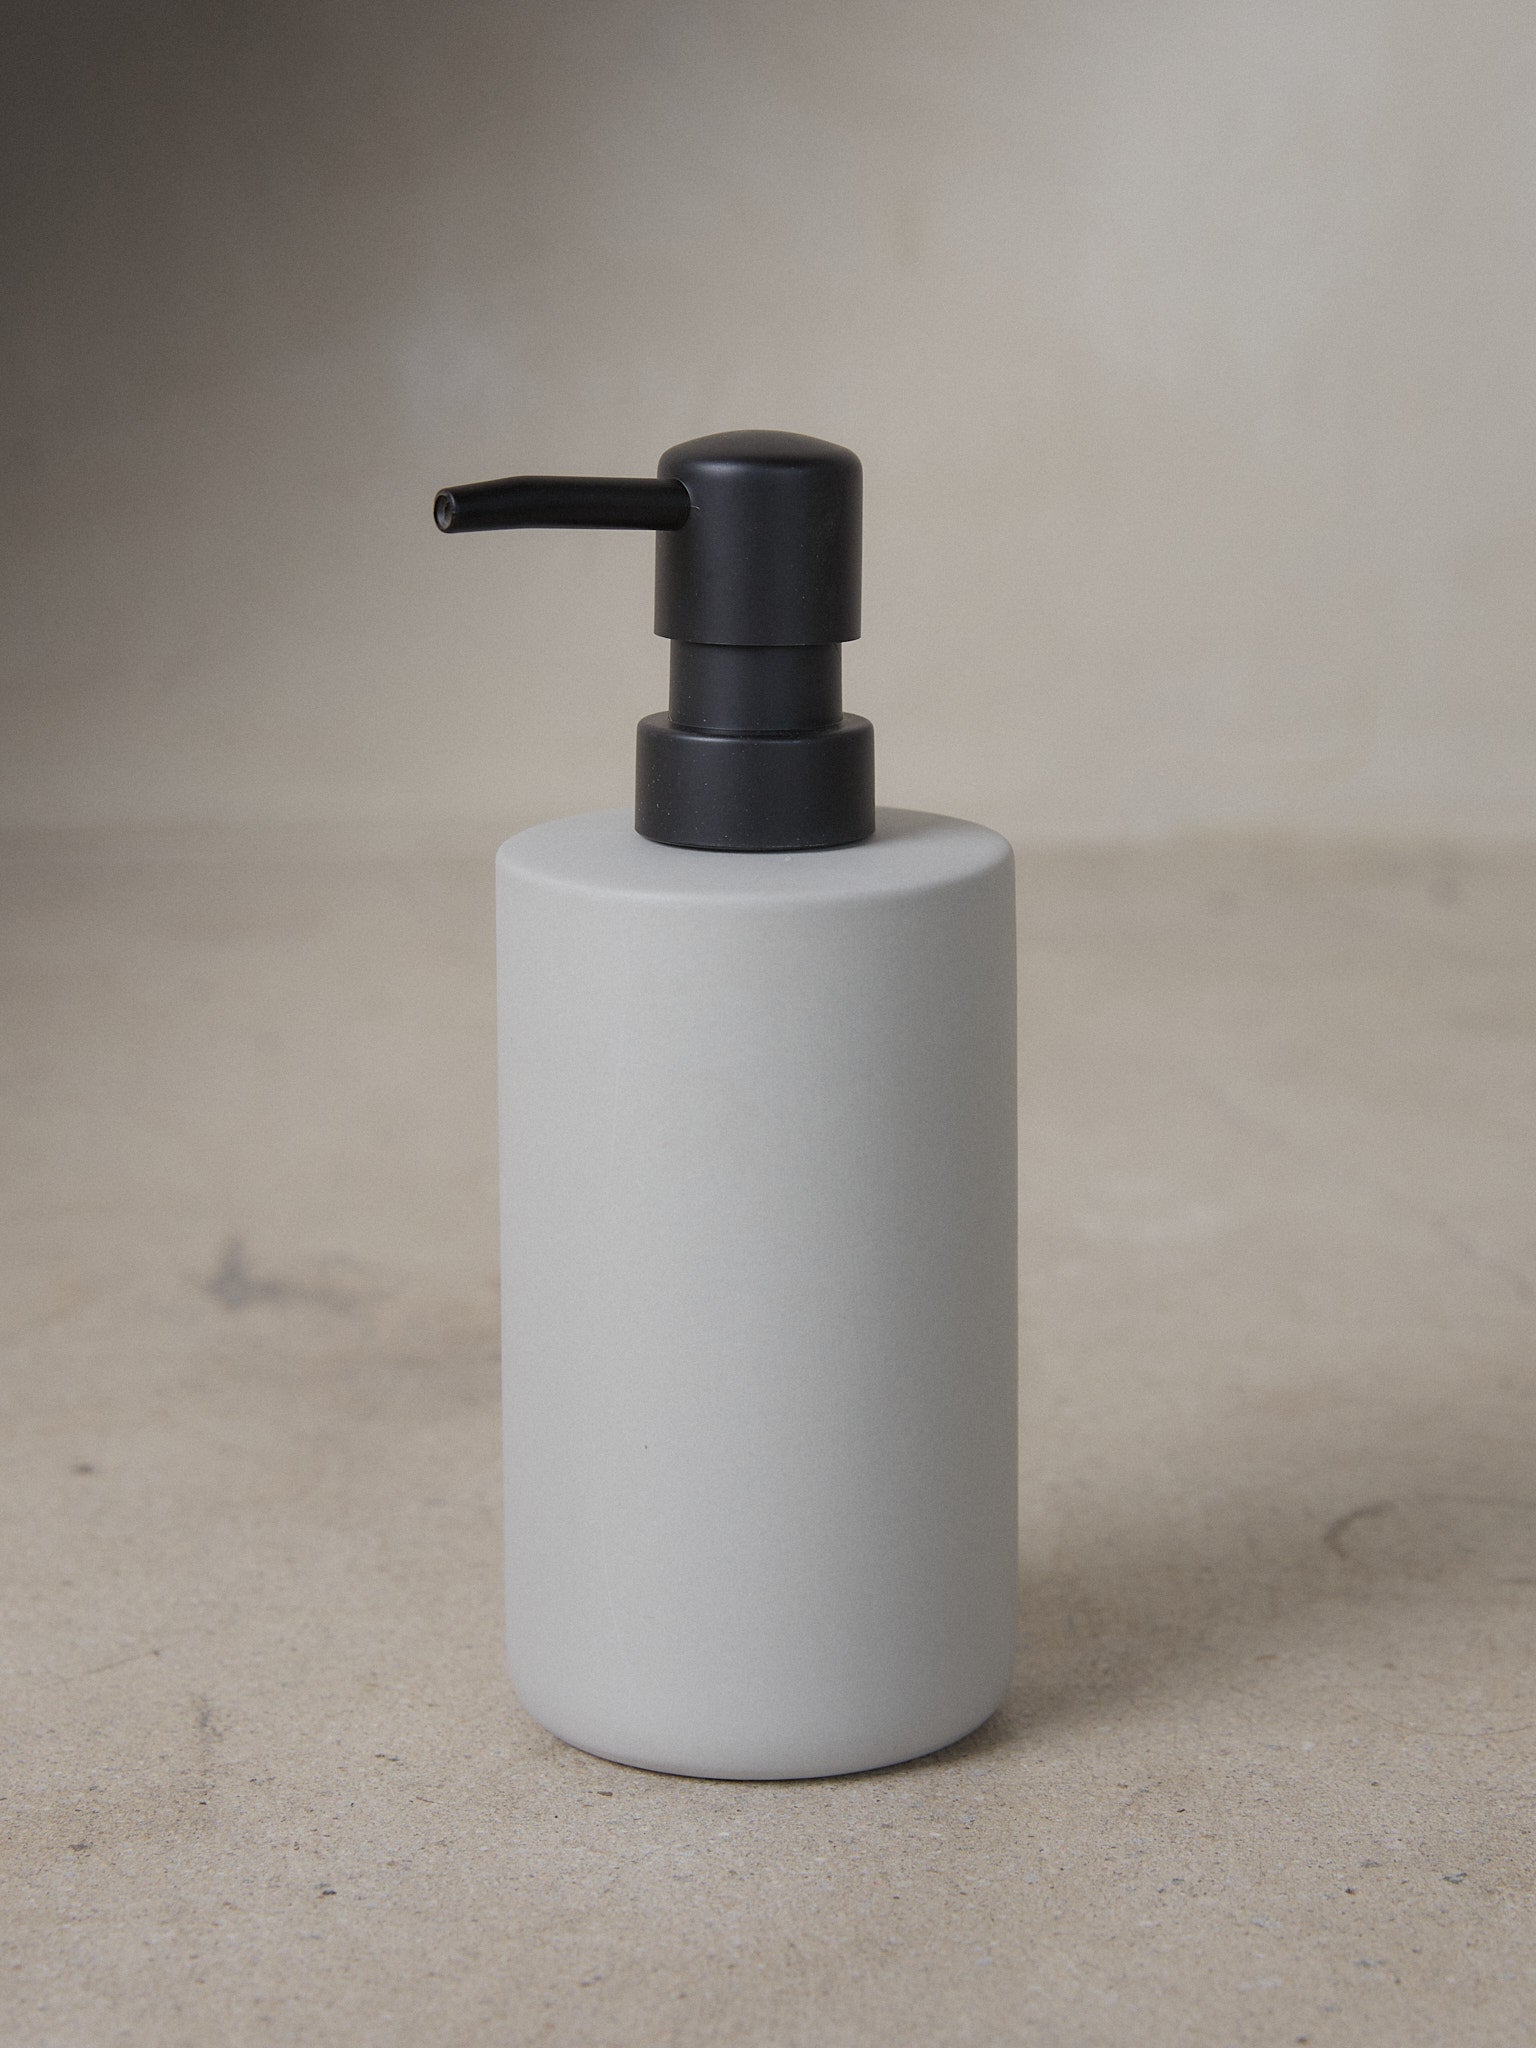 Cose Soap Dispenser. A study in refined simplicity, the Cose Soap Dispenser by Bertrand Lejoly for Serax adds subtle luxury to any bathroom or kitchen.